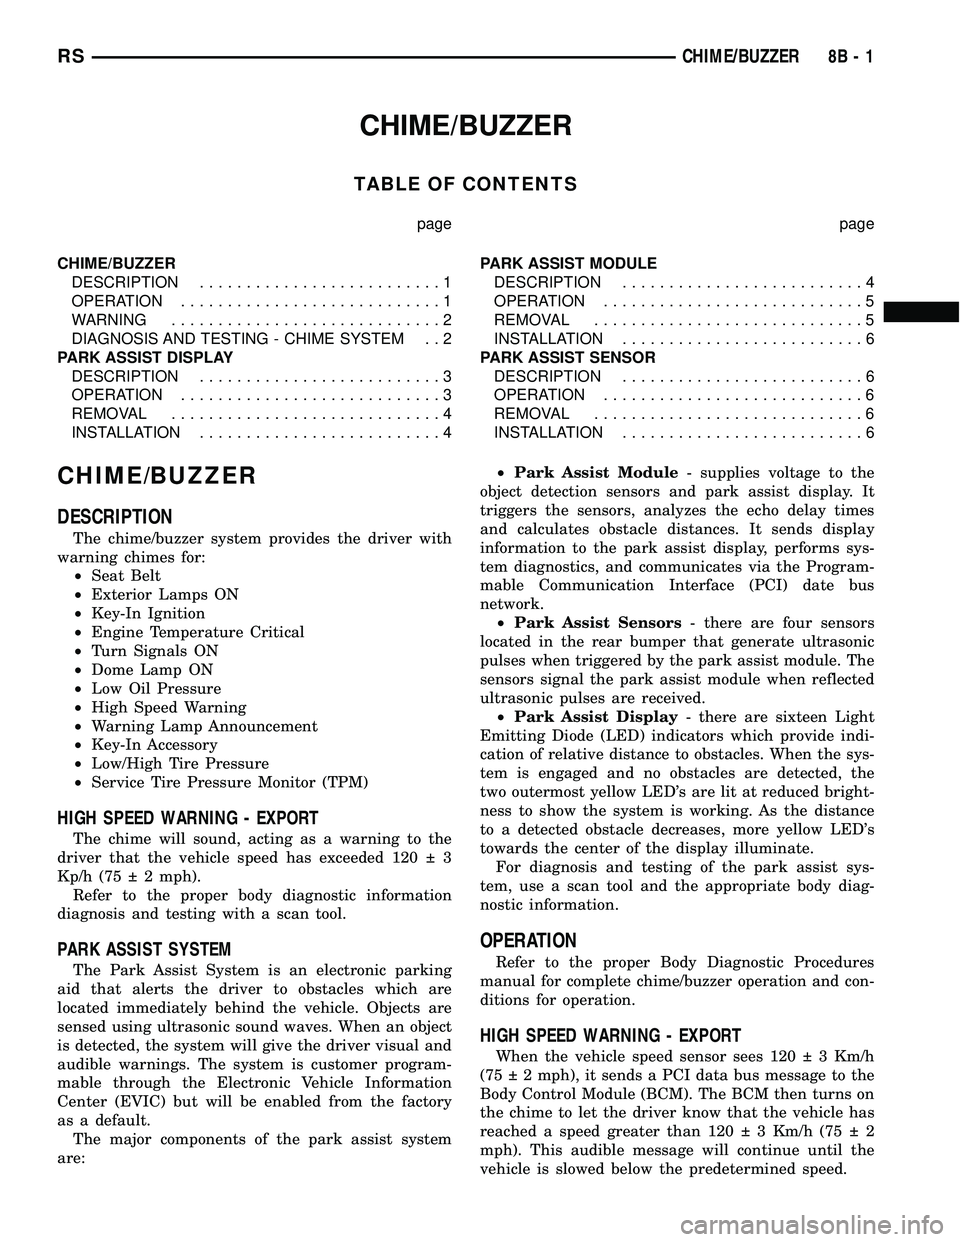 CHRYSLER CARAVAN 2005  Service Manual CHIME/BUZZER
TABLE OF CONTENTS
page page
CHIME/BUZZER
DESCRIPTION..........................1
OPERATION............................1
WARNING.............................2
DIAGNOSIS AND TESTING - CHIME 